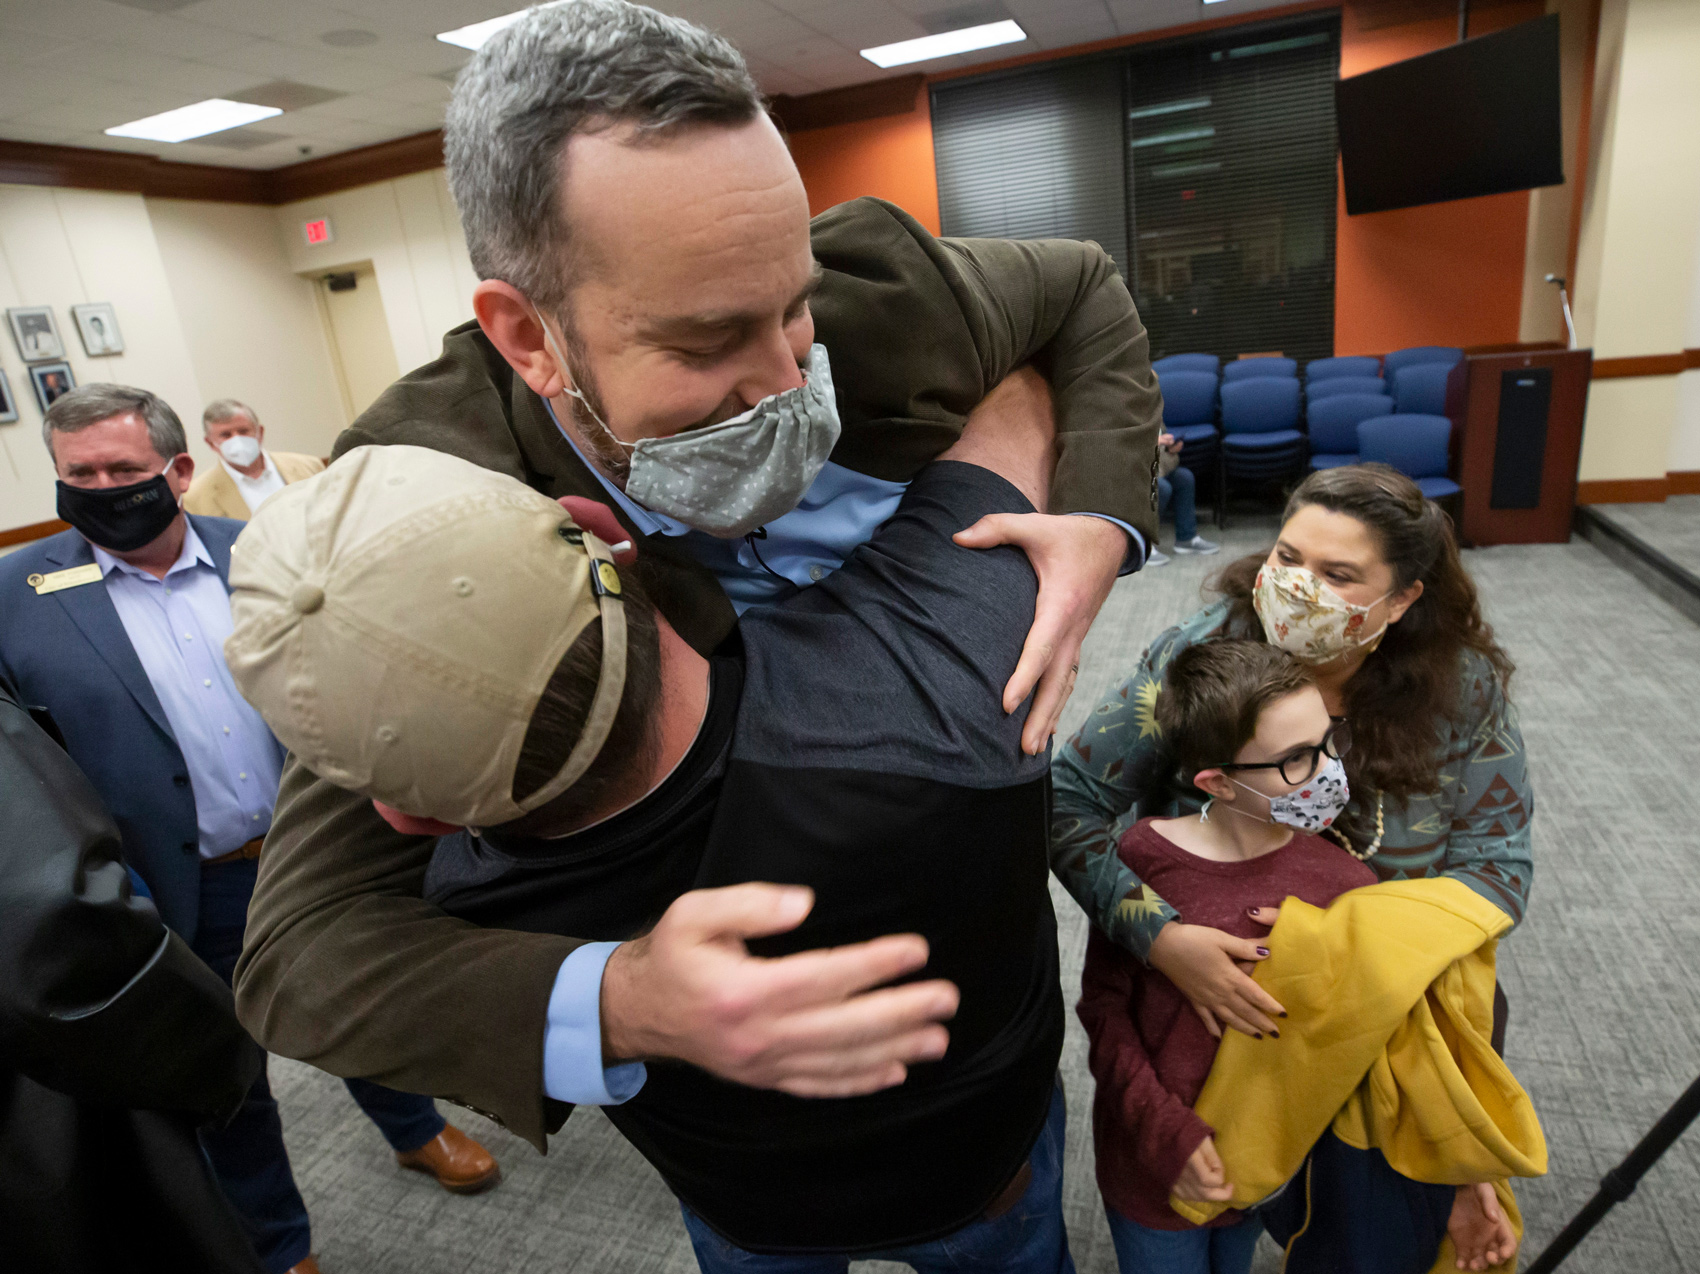 Mayor Sean Skipworth is lifted into the air by friend and campaign worker James Owens as his wife Melissa Skipworth and son Christopher Skipworth watch after his name was drawn from a hat to break a tie with opponent Jennifer Lawrence at Dickinson City Hall on Thursday, Jan. 7, 2021.